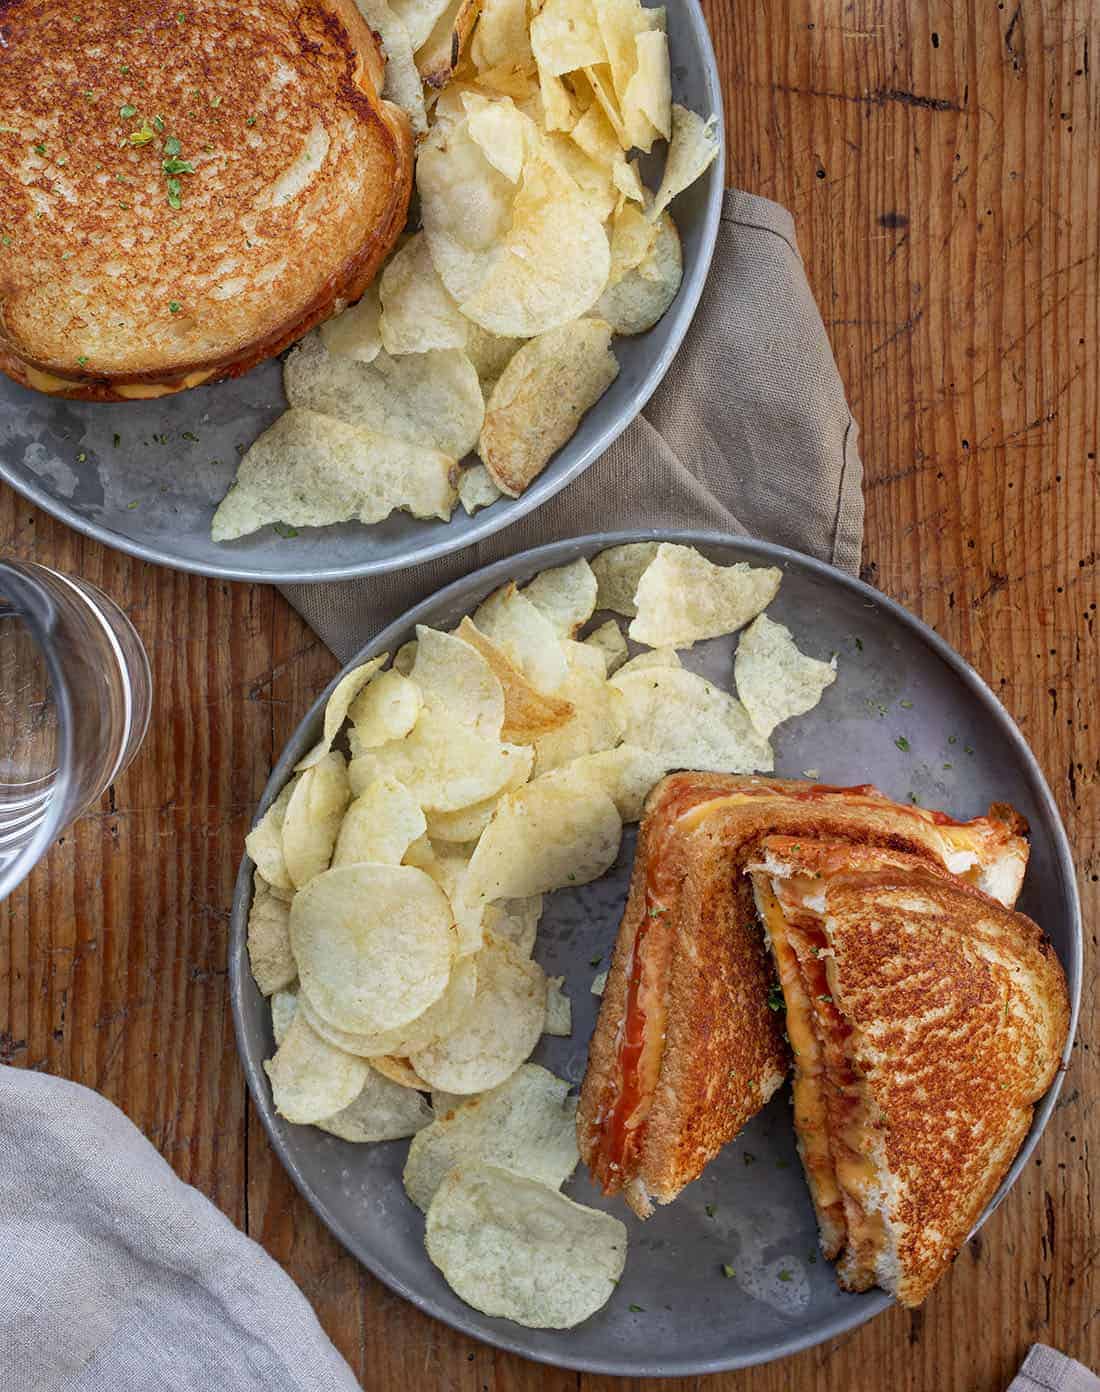 Triple Decker Tomato Grilled Cheese Sandwiches on Plates with Potato Chips from Overhead